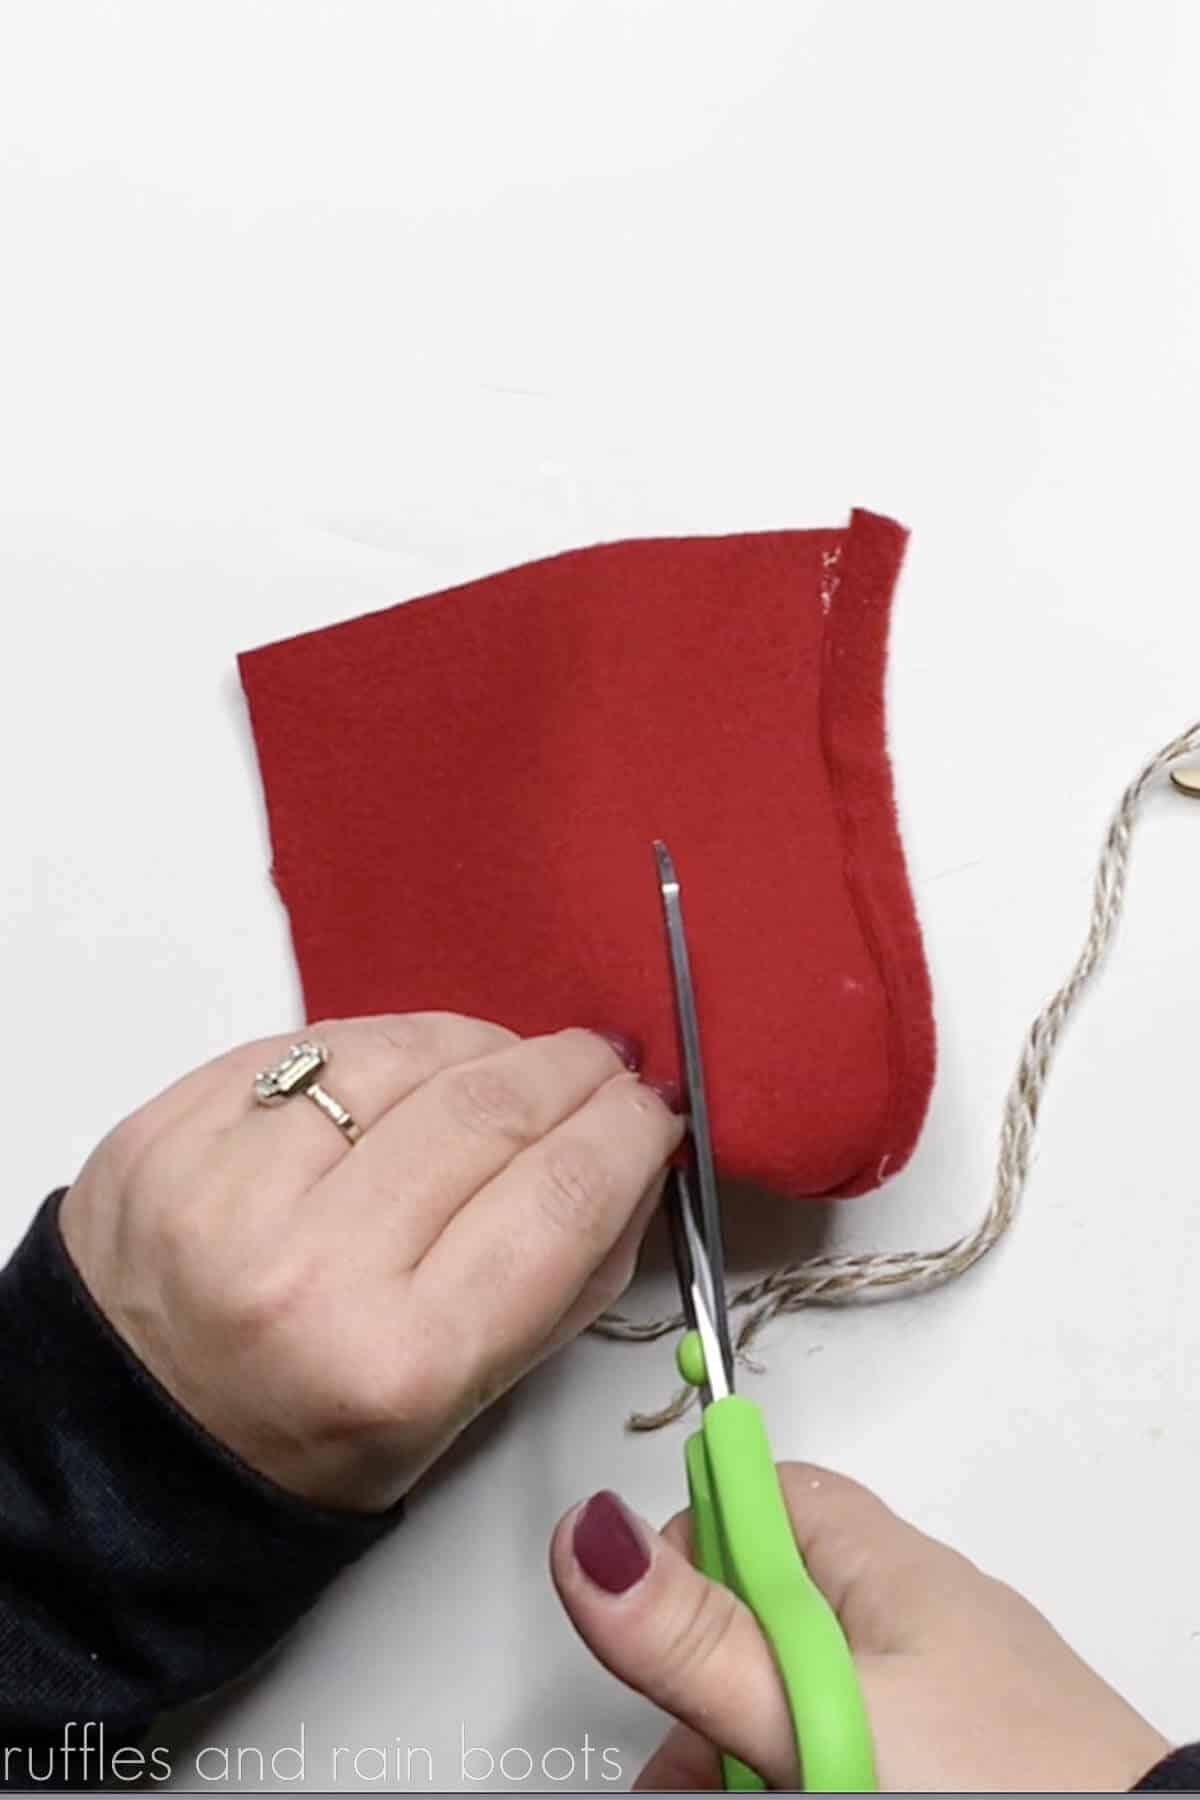 Crafter cutting into a red fleece fabric to make a gnome hat for a reindeer.